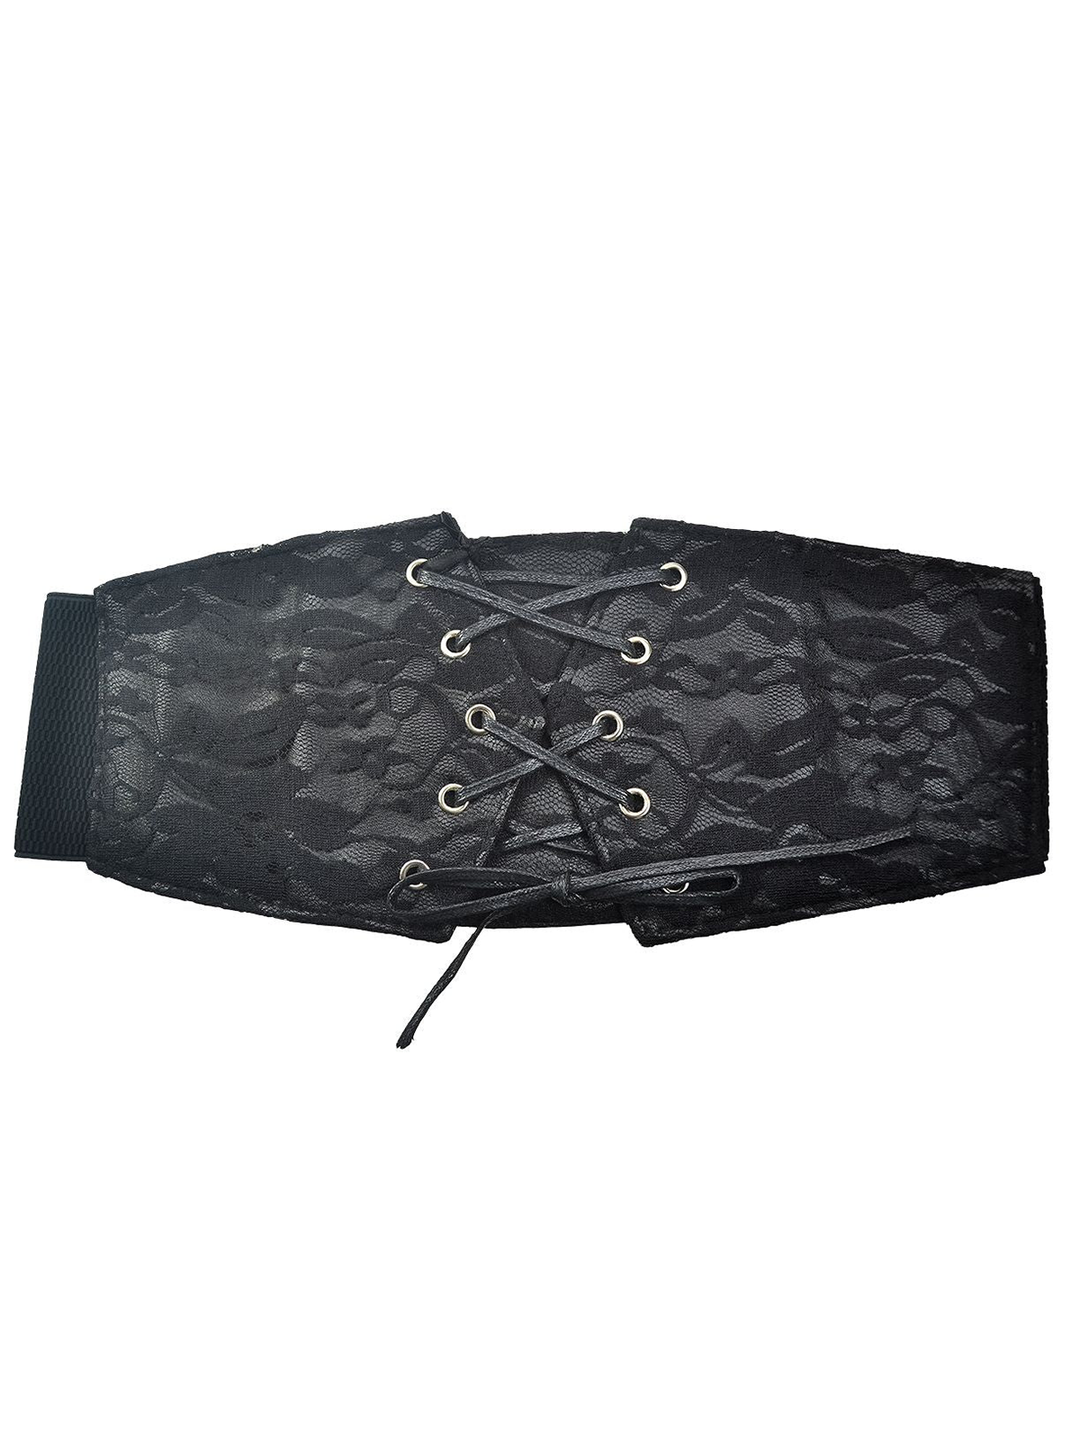 Vegan Leather And Lace Corset Belt